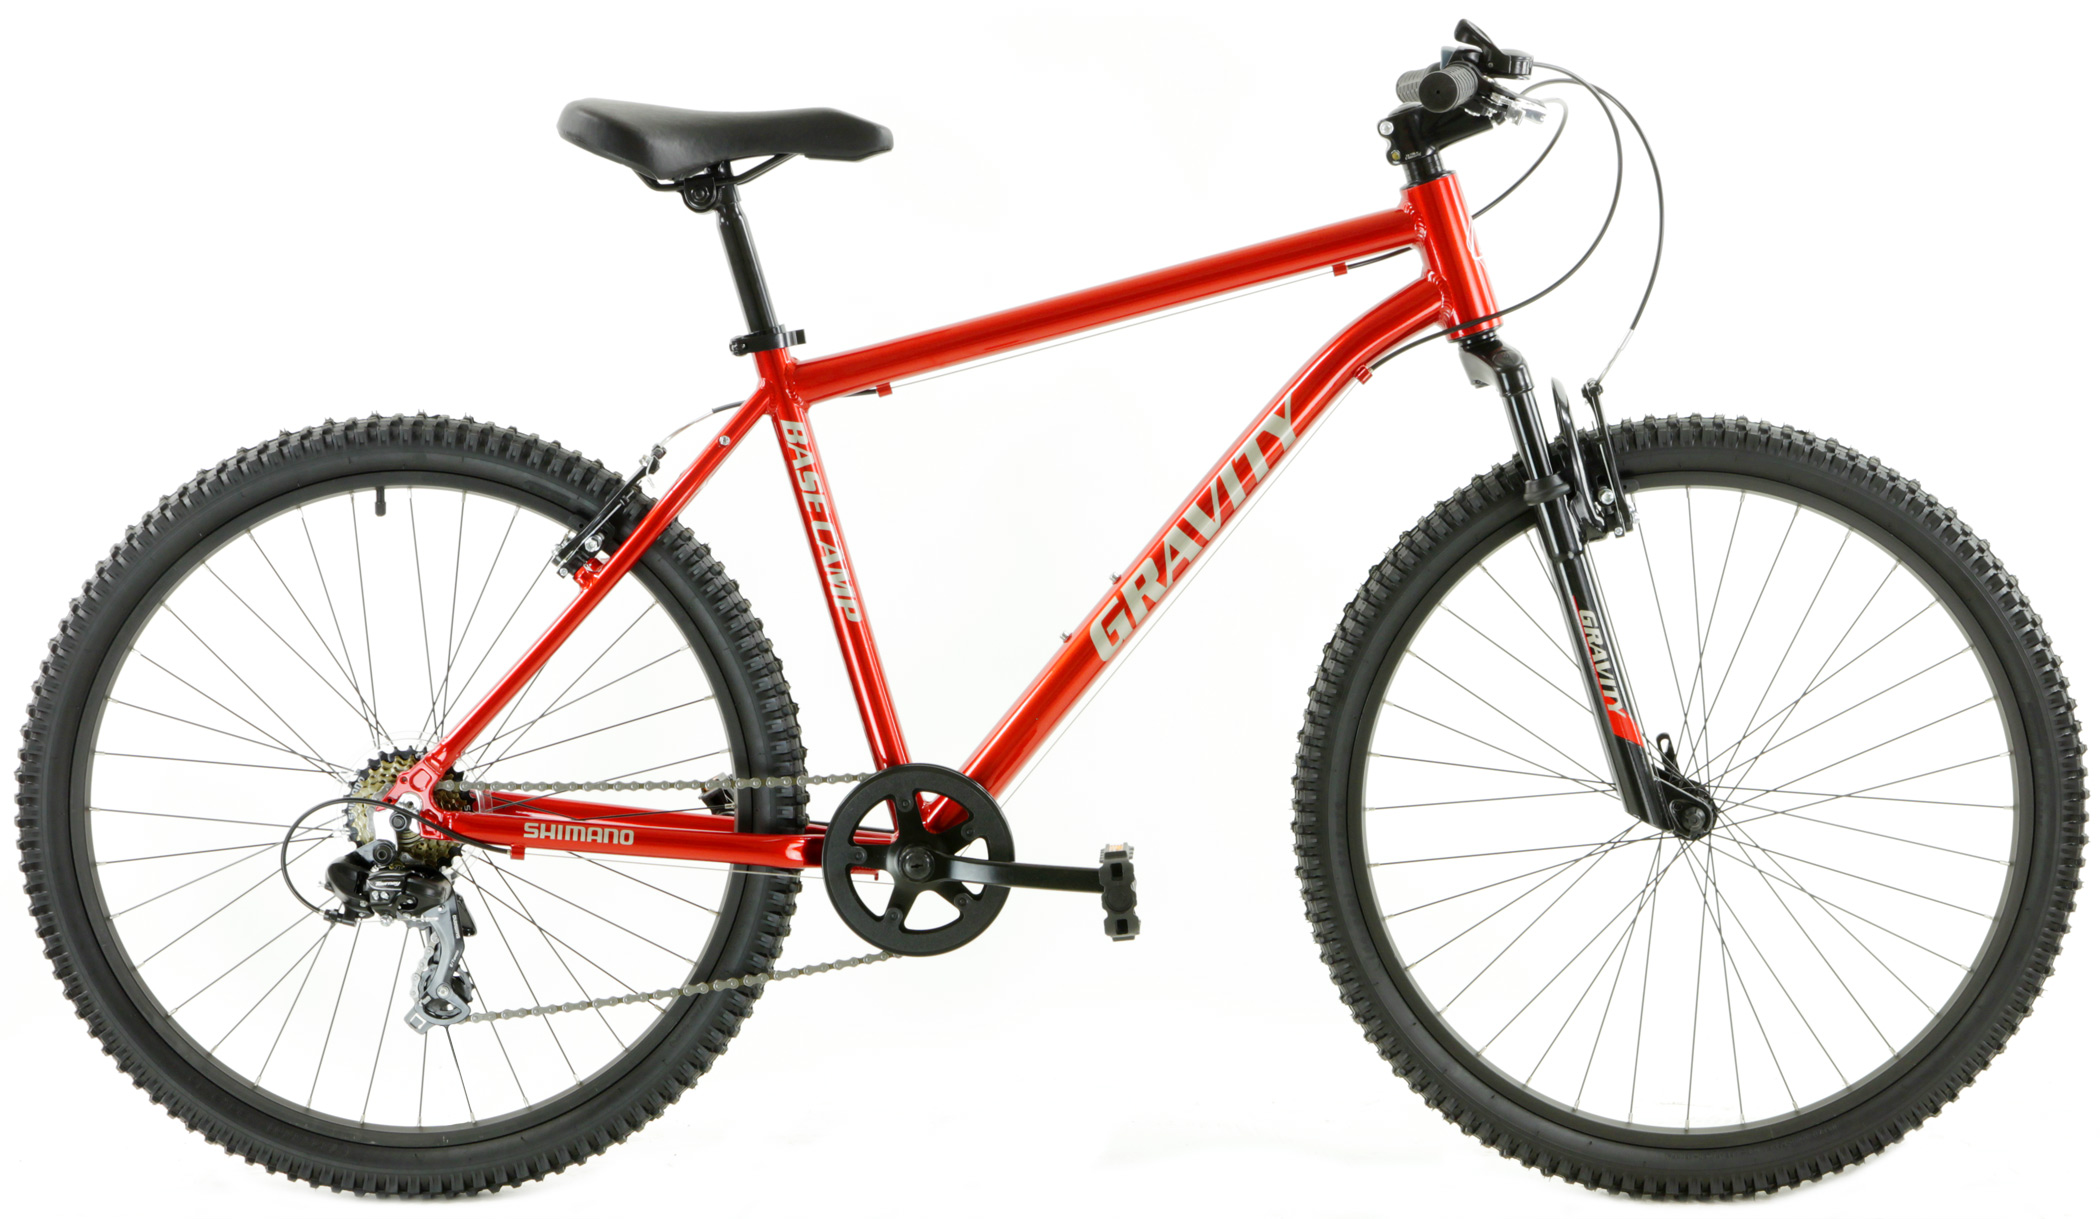 BikeIsland.com - Bicycle Parts, Accessories and Clothing at 